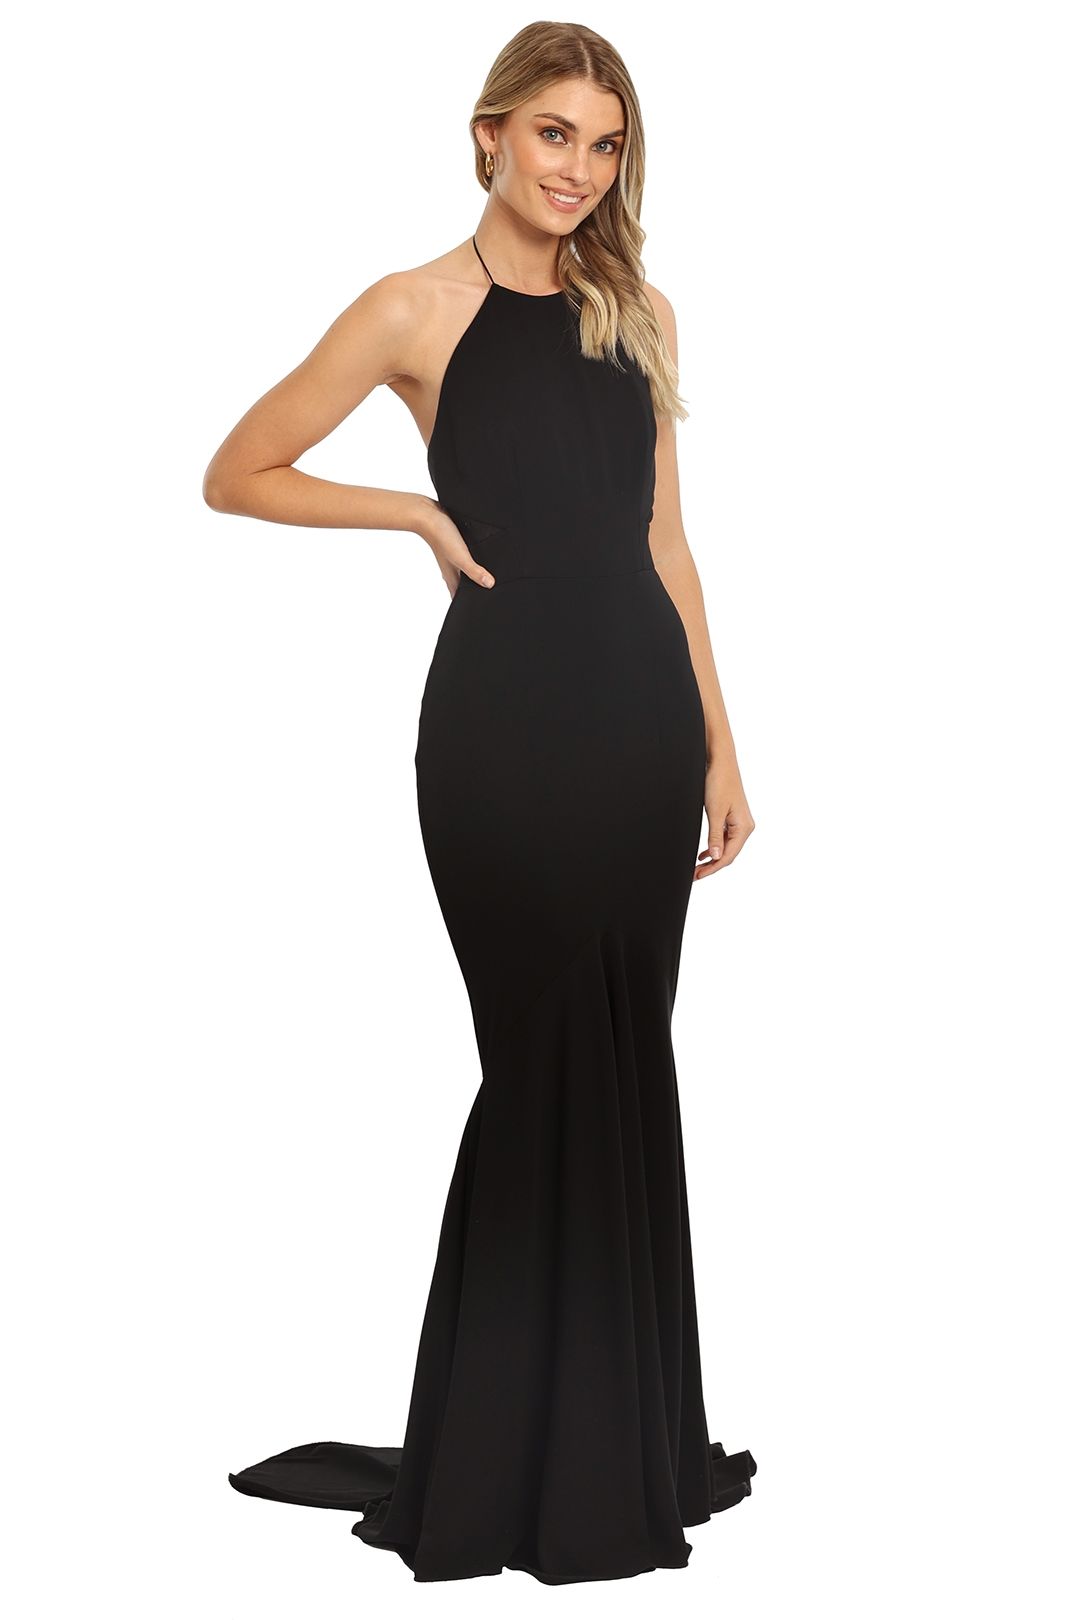 Alex Perry Talise Gown Black floor length